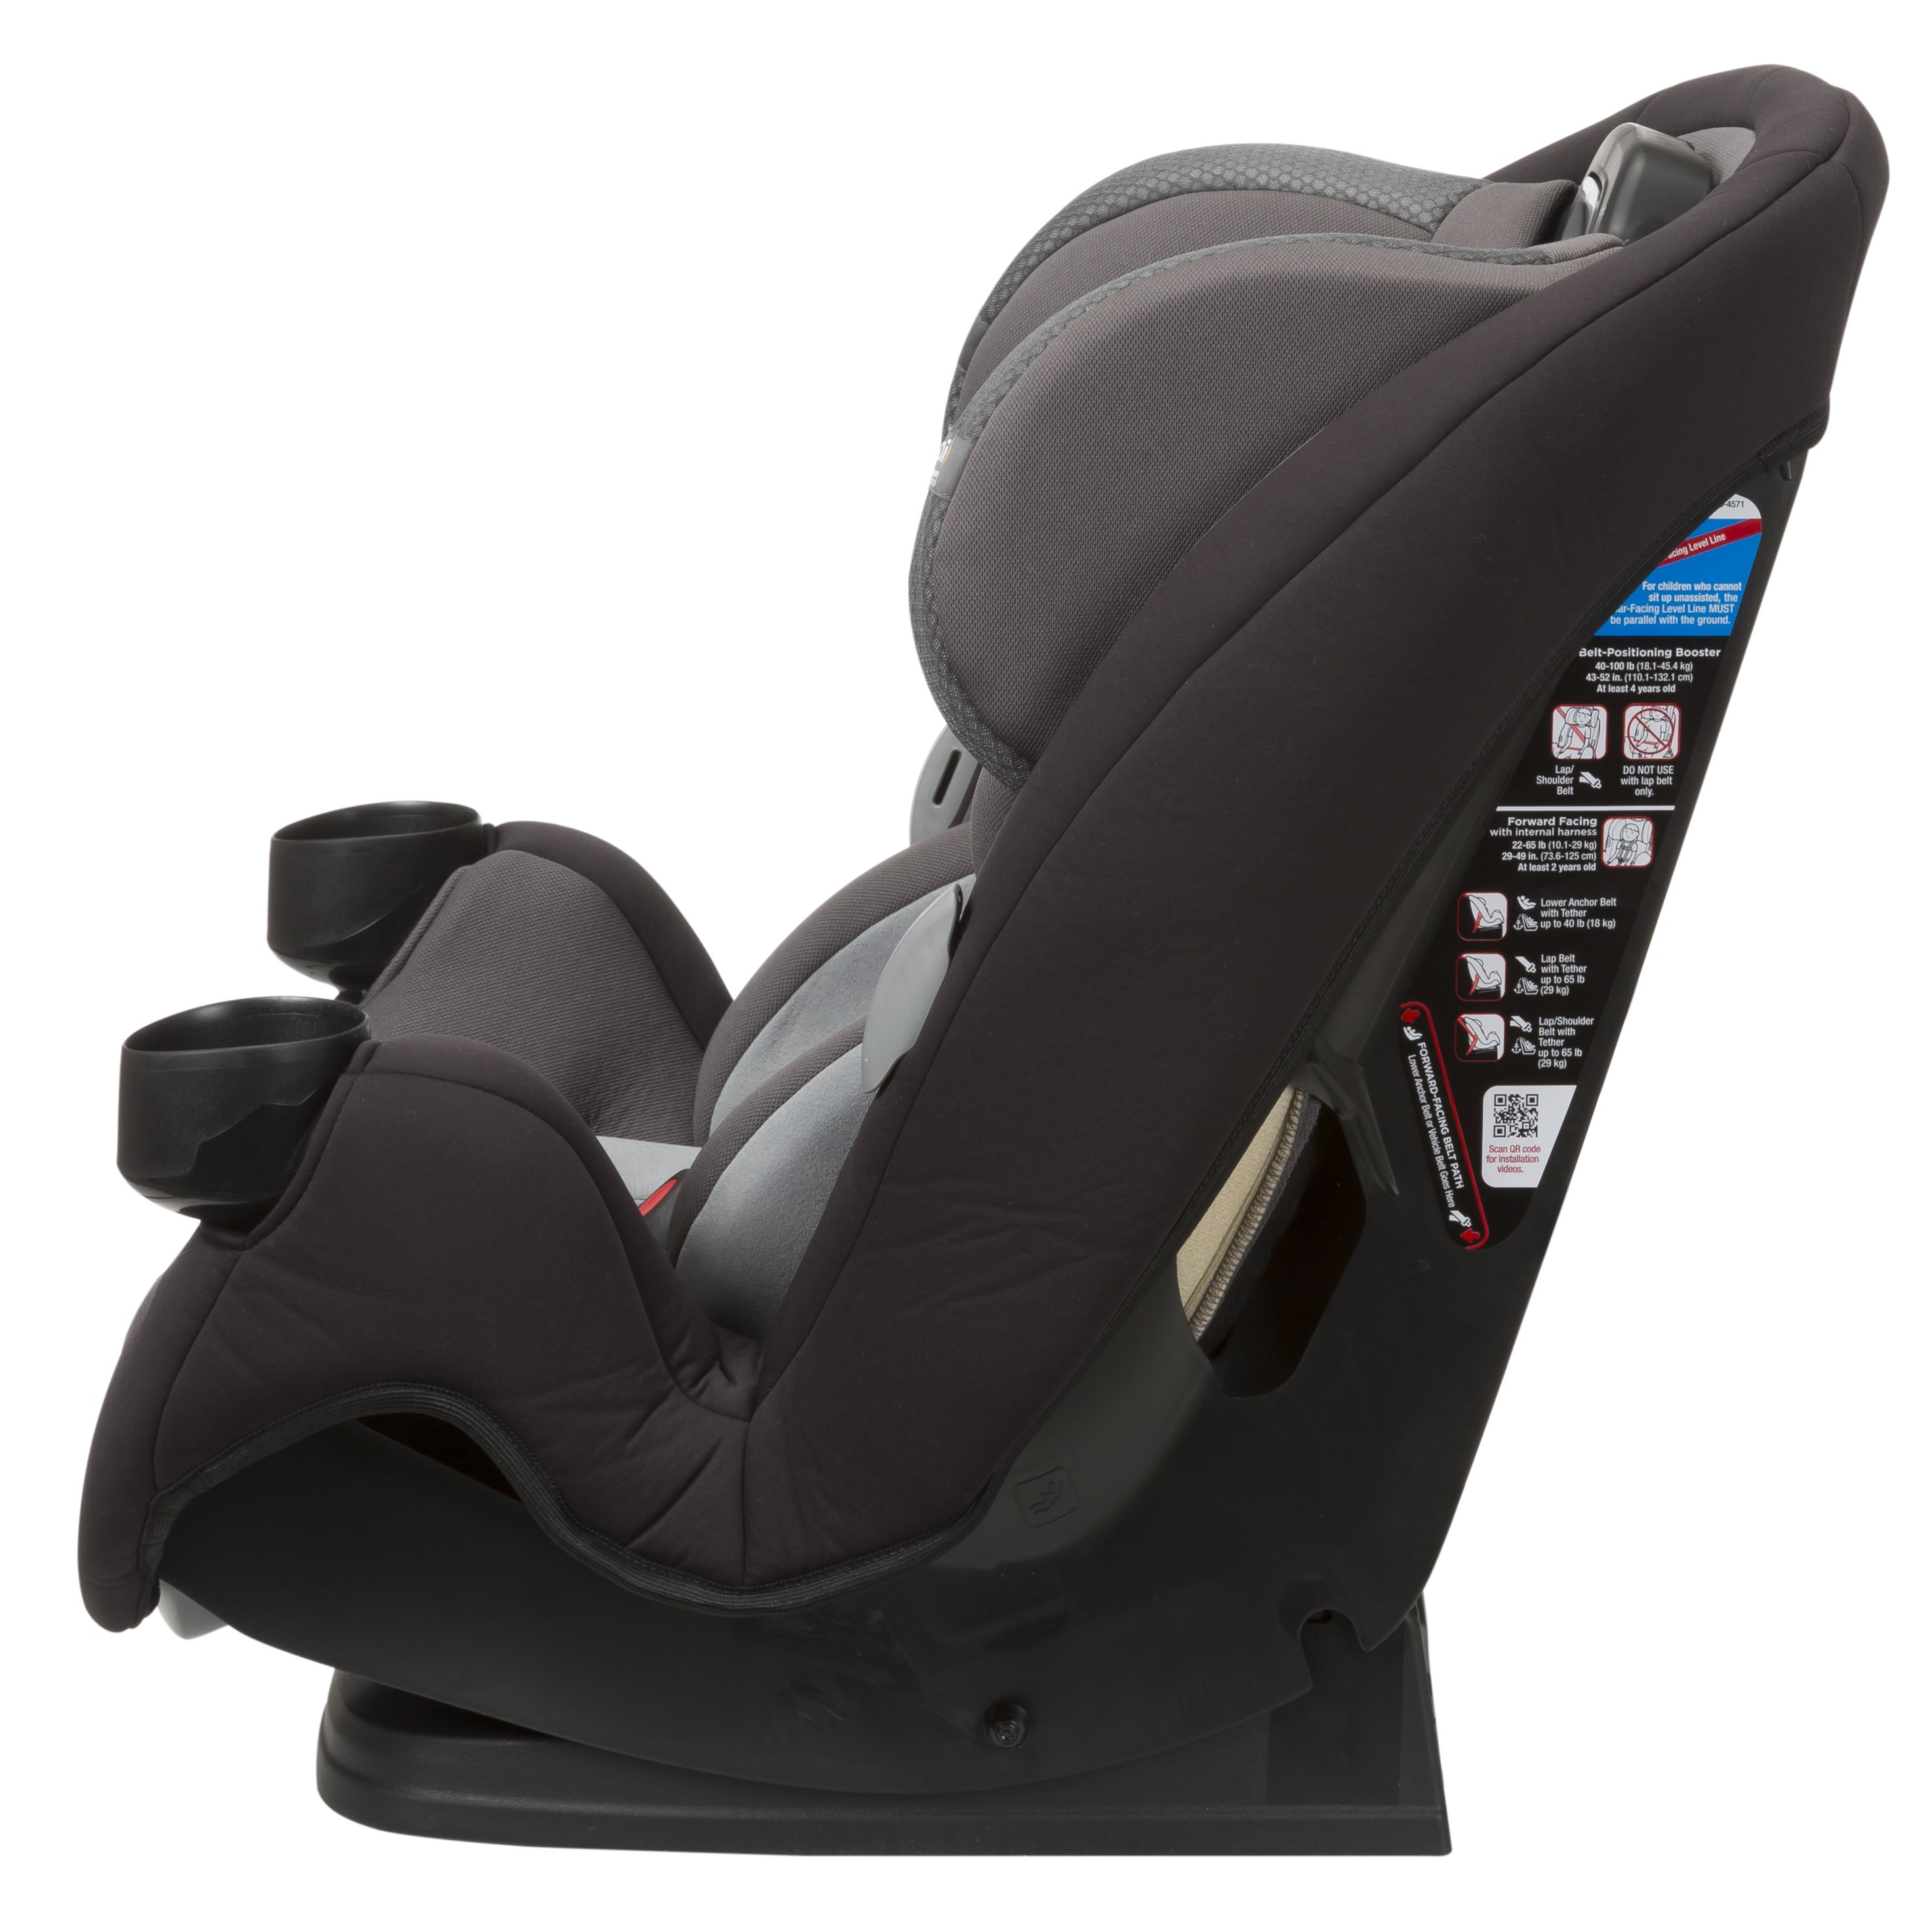 Safety 1st MultiFit EX Air All-in-One Car Seat, Amaro, Toddler - image 5 of 10